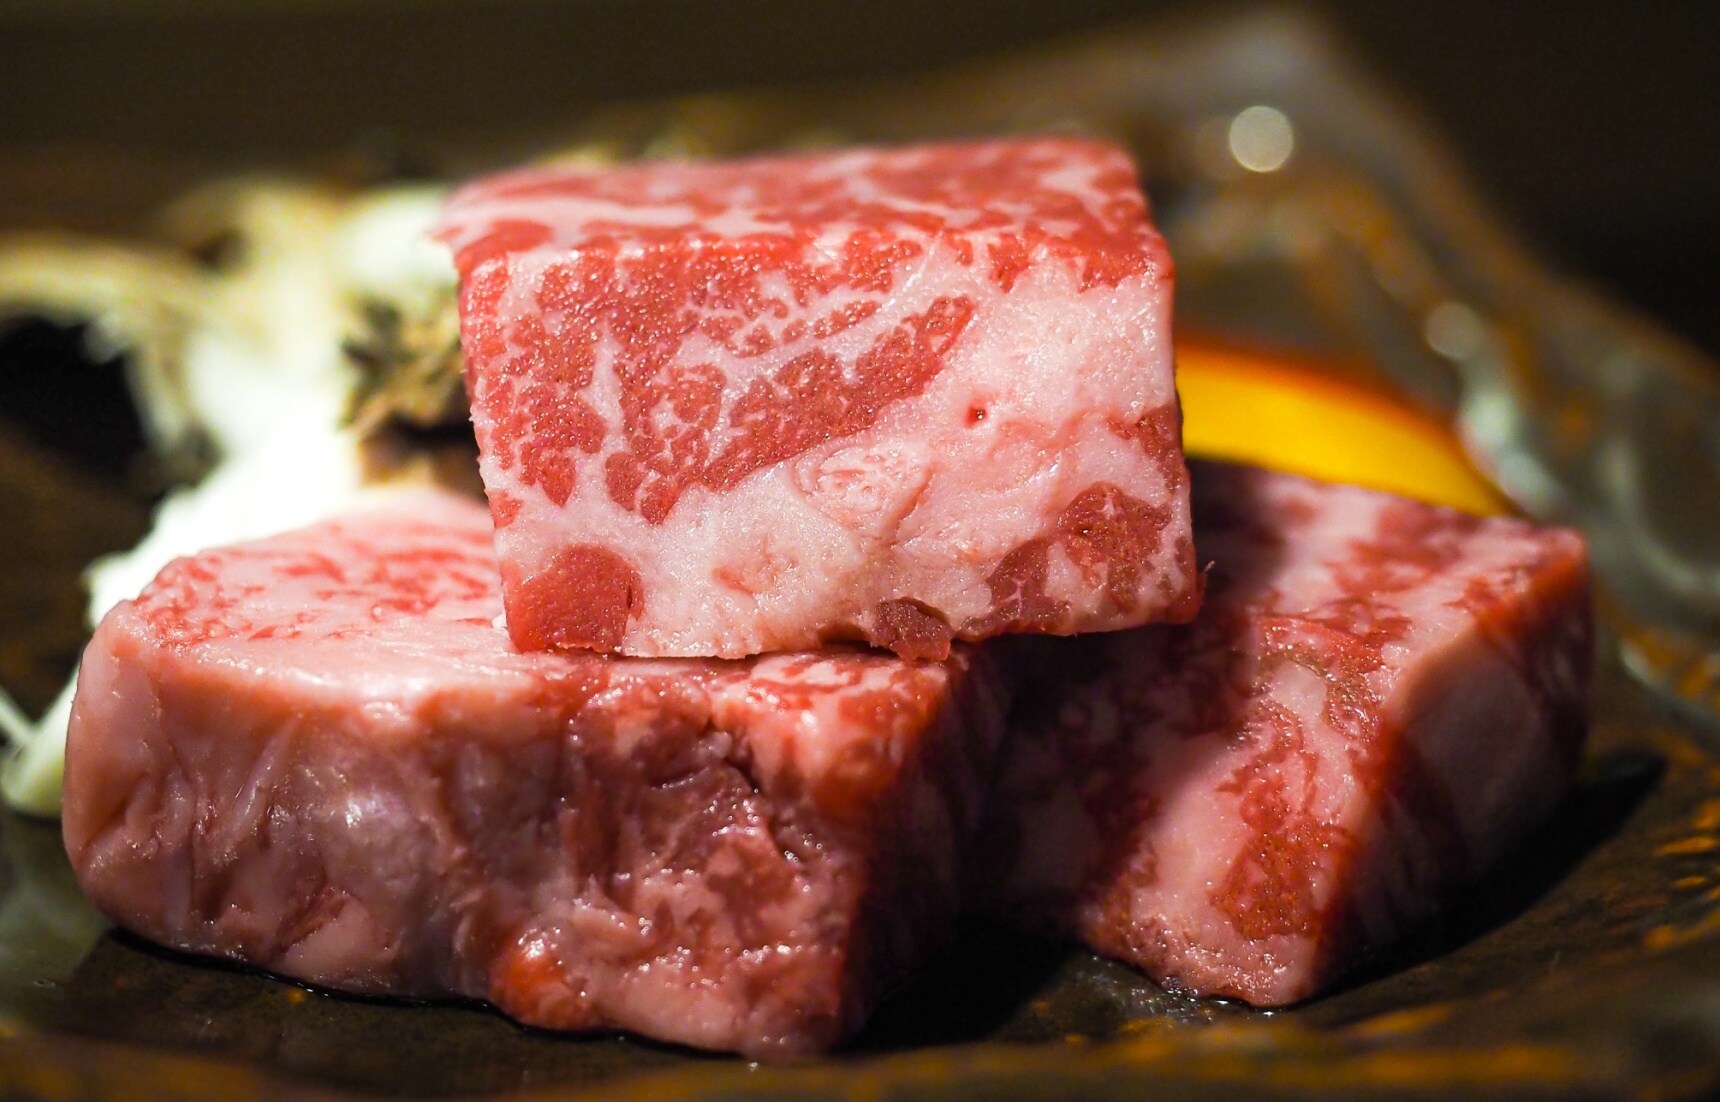 Delicious Wagyu in Japan’s Volcanic Heartland